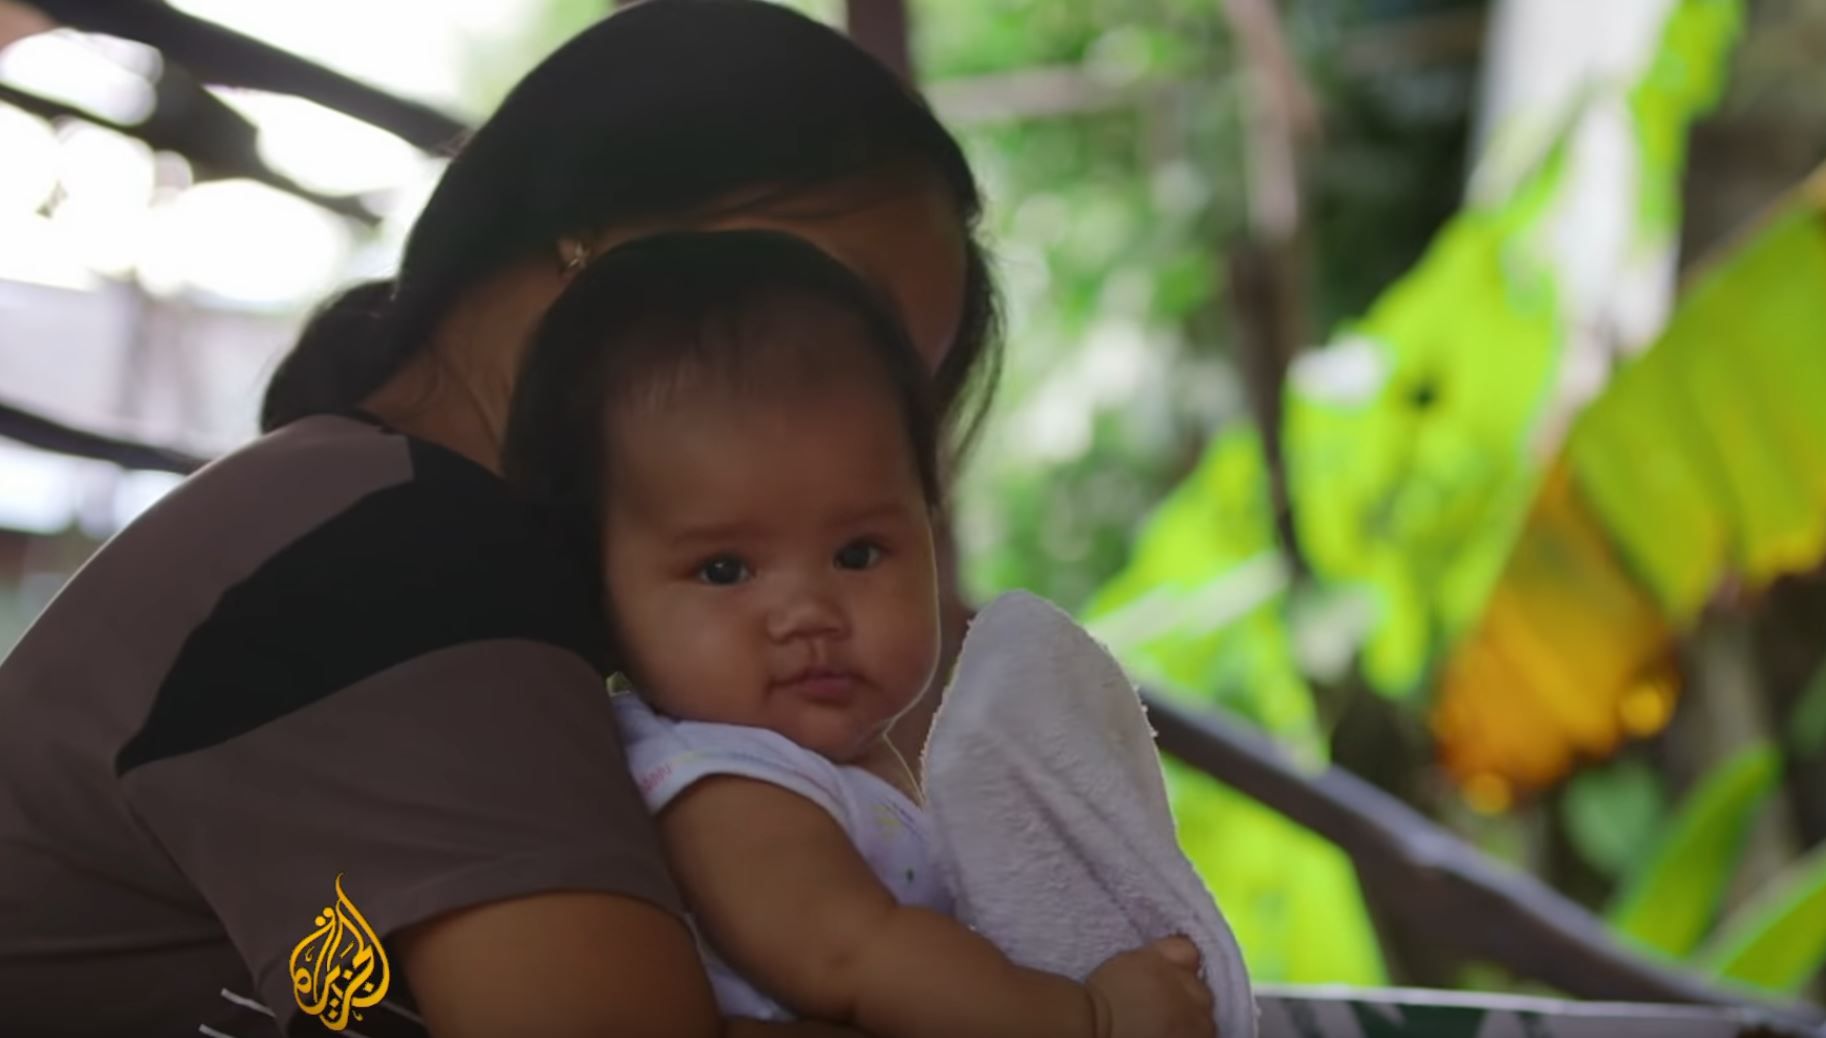 The Philippines' Baby Factory